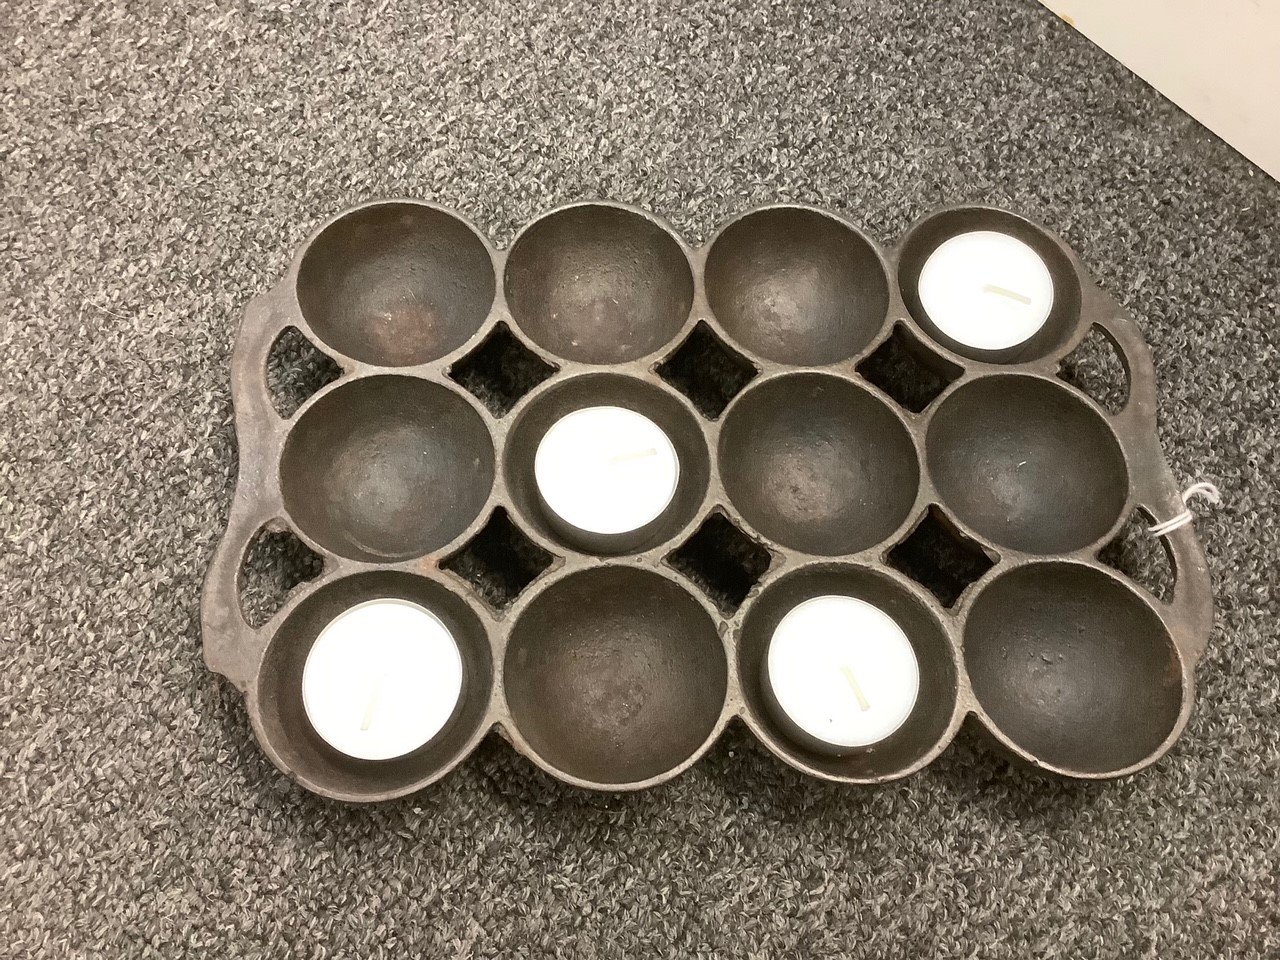 #waybackwednesday This is a Gem pan, used to bake small muffins, popular in the late 1800s.  Check out case #127. #heretodaymaybetomorrowmaybenot #antiques #decorandmore #vintage #rocantiques #roc #cdga #OMA #ontariomallantiques #waybackwednesday #vi